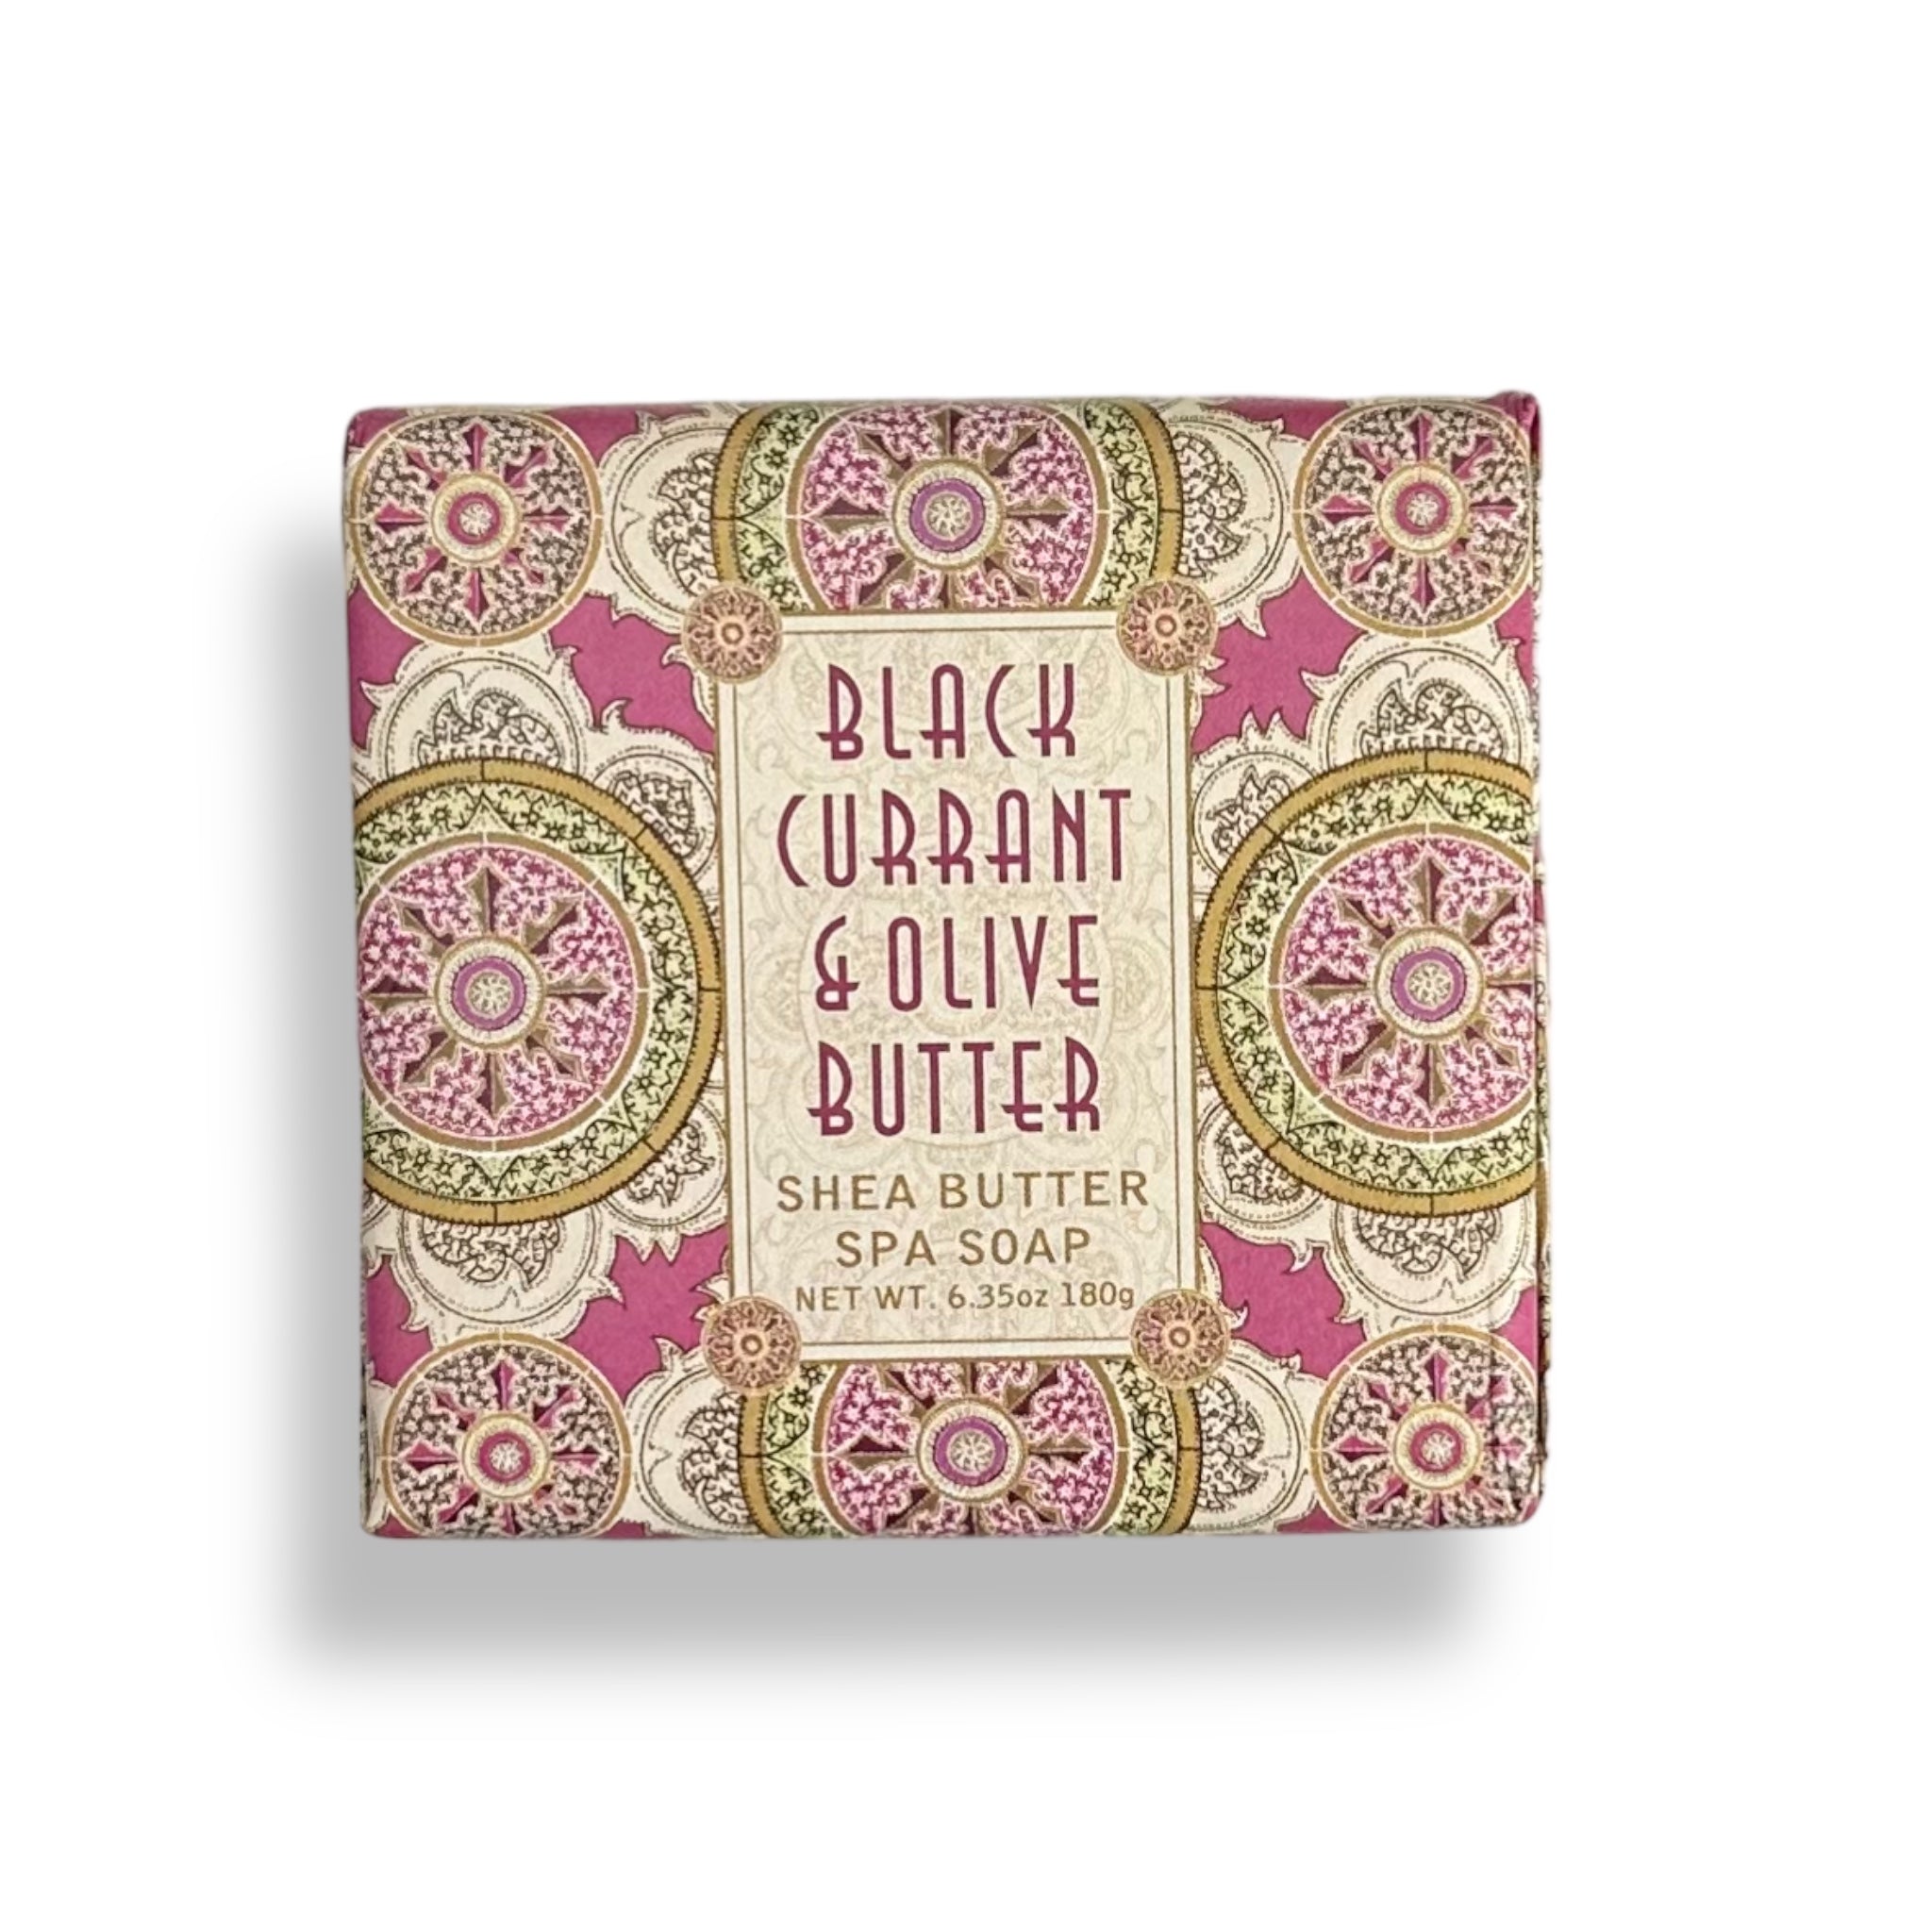 Greenwich Bay Trading Company BLACKCURRANT & Olive Butter Soap